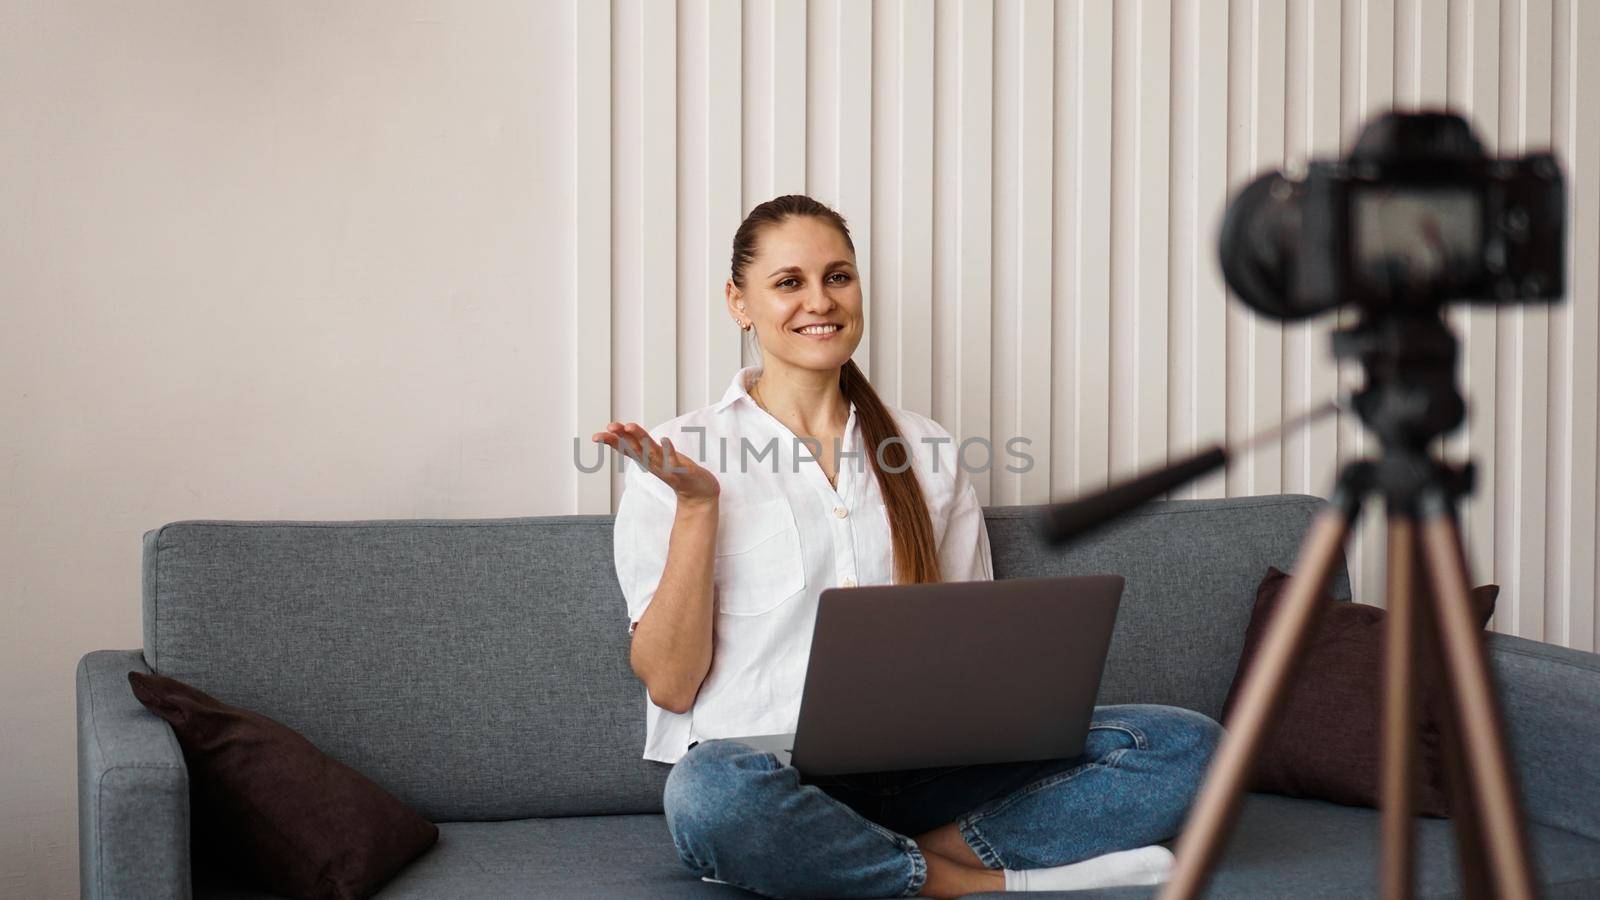 Smiling female blogger records a new video. She sits on the couch at home and holds a laptop. Positive business blog concept.